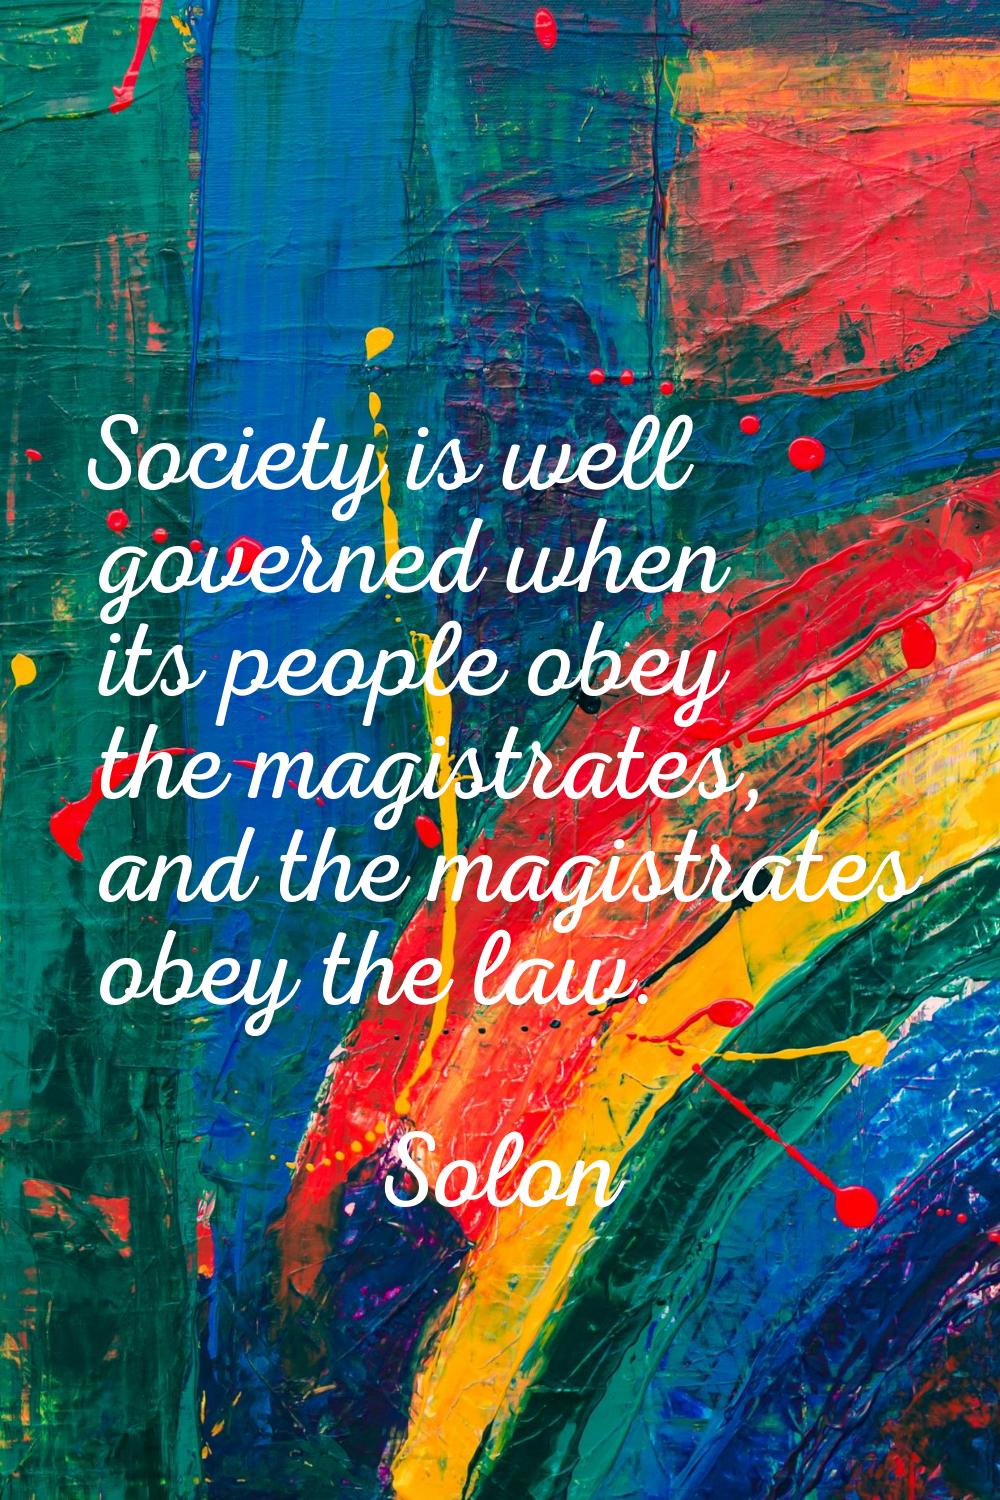 Society is well governed when its people obey the magistrates, and the magistrates obey the law.